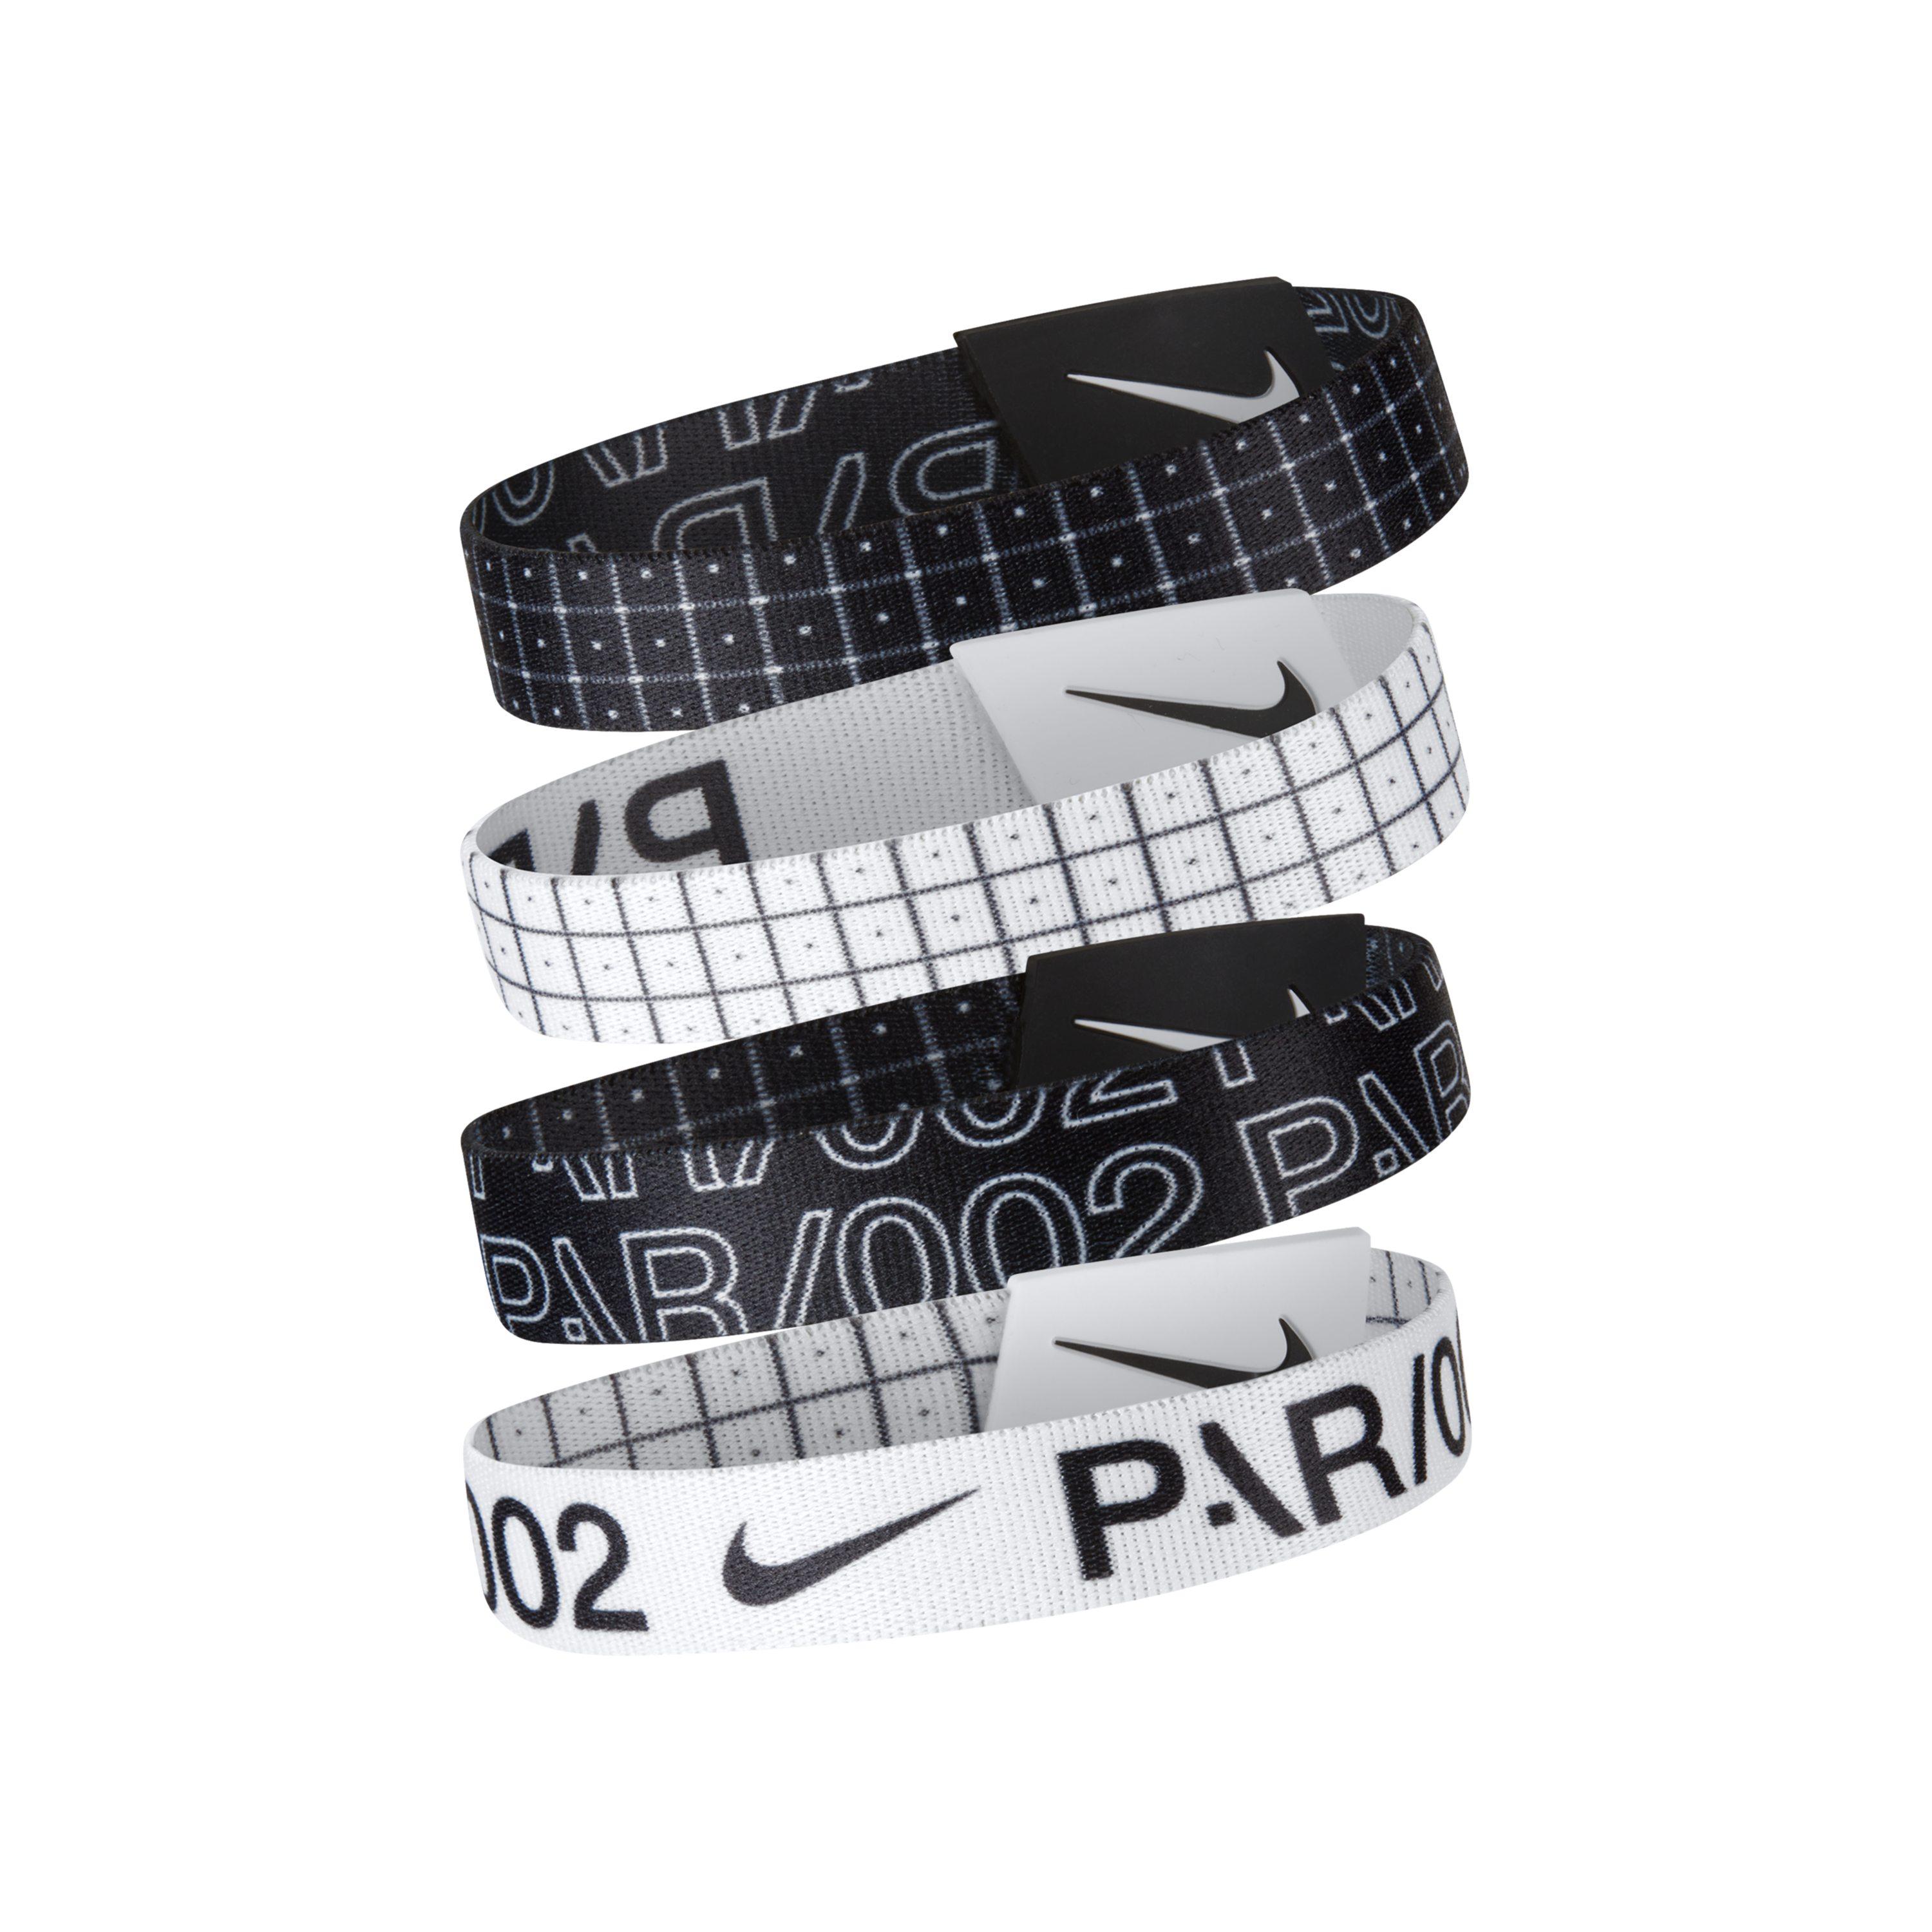 Authentic Nike Baller ID Bands, Sports Equipment, Exercise & Fitness,  Toning & Stretching Accessories on Carousell